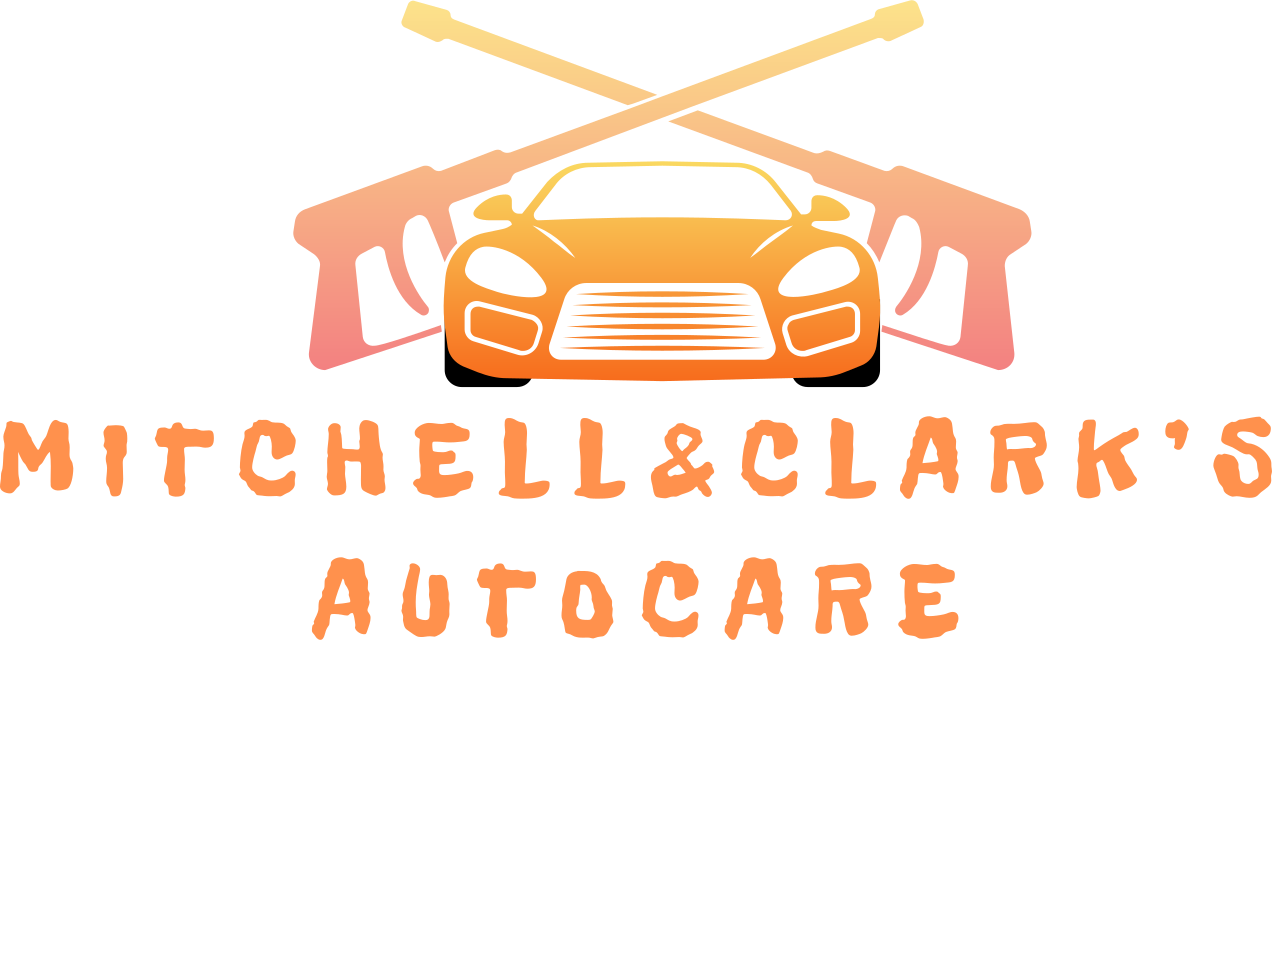 MITCHELL&CLARKS AUOTOCARE's web page